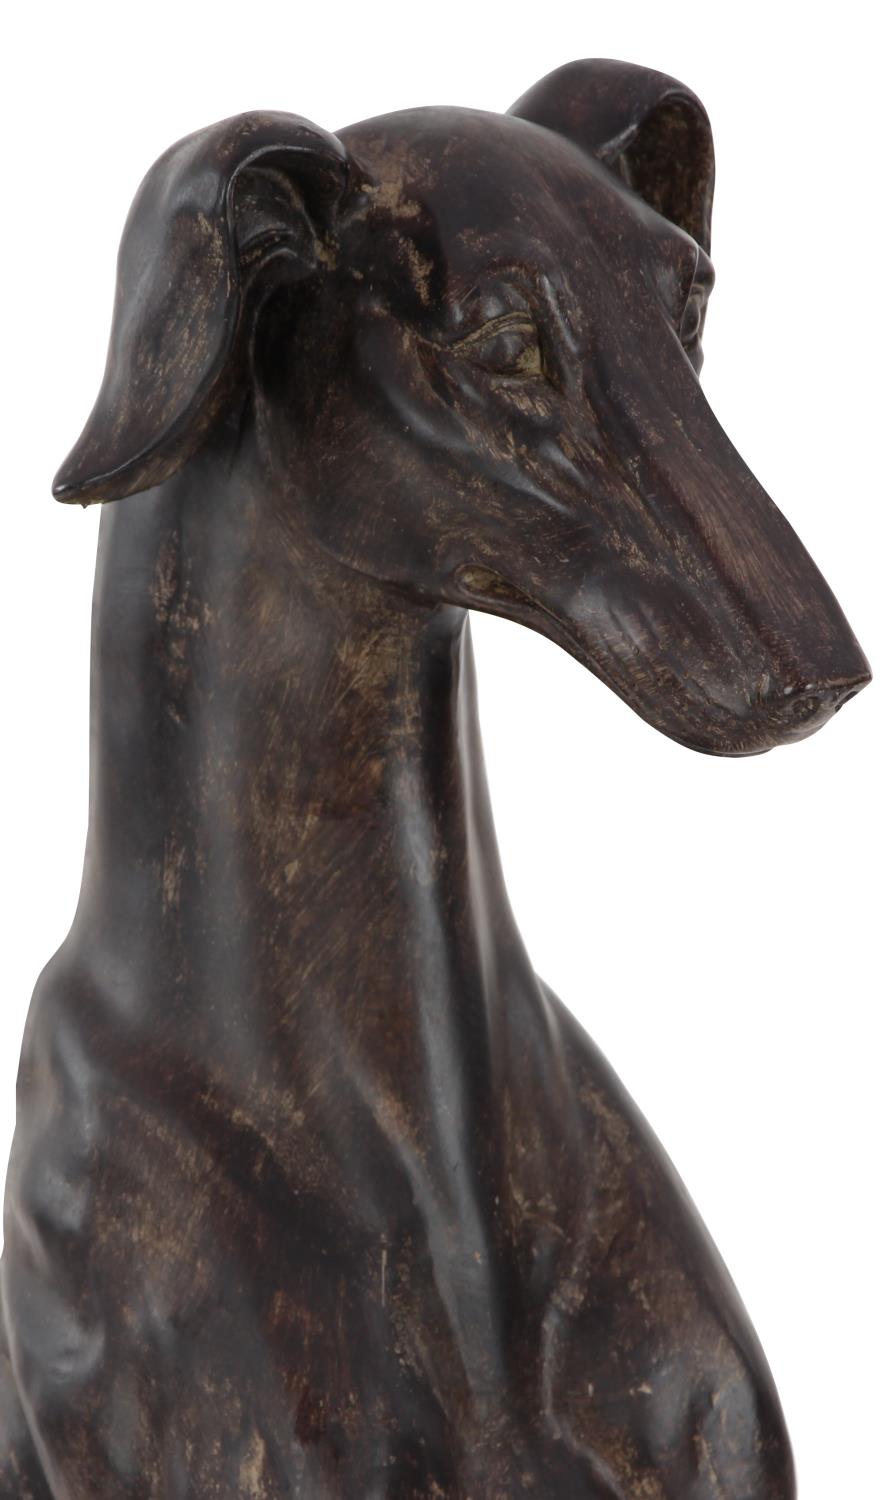 Zimlay Traditional Whippet Dog Resin Sculpture 44670